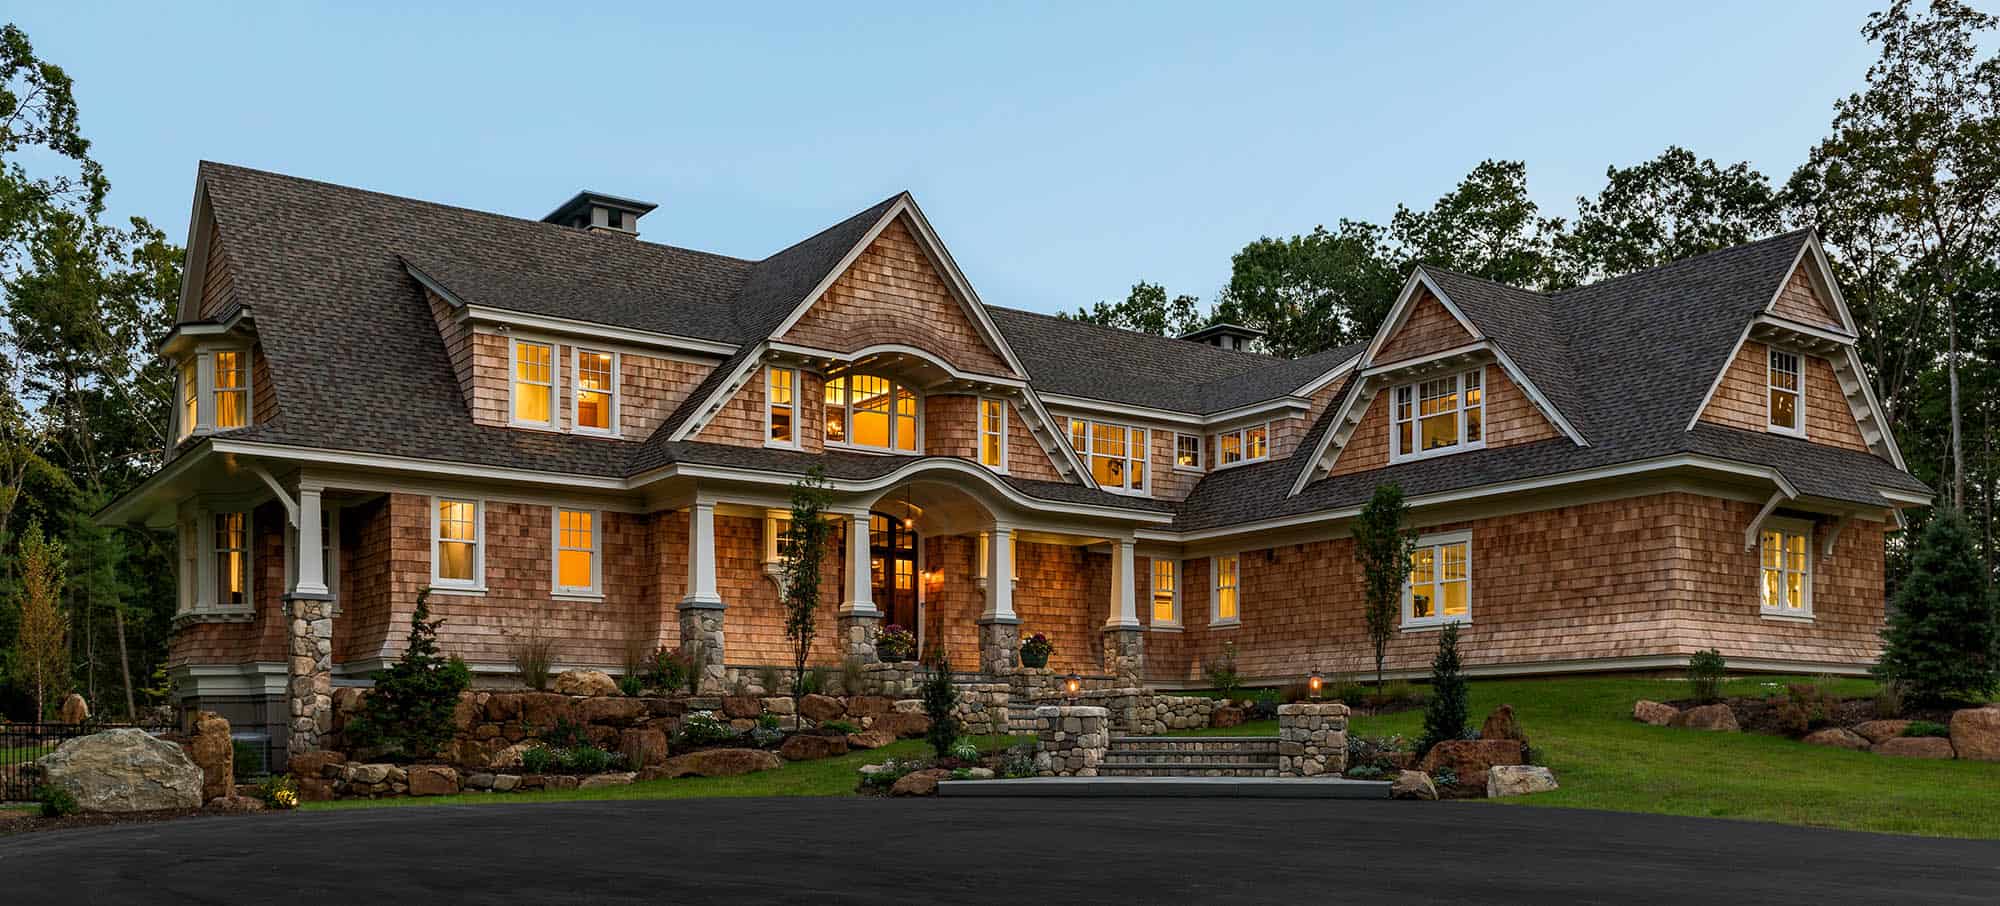 NORTHSHORE SHINGLE STYLE HOME (PRISM Gold Award)